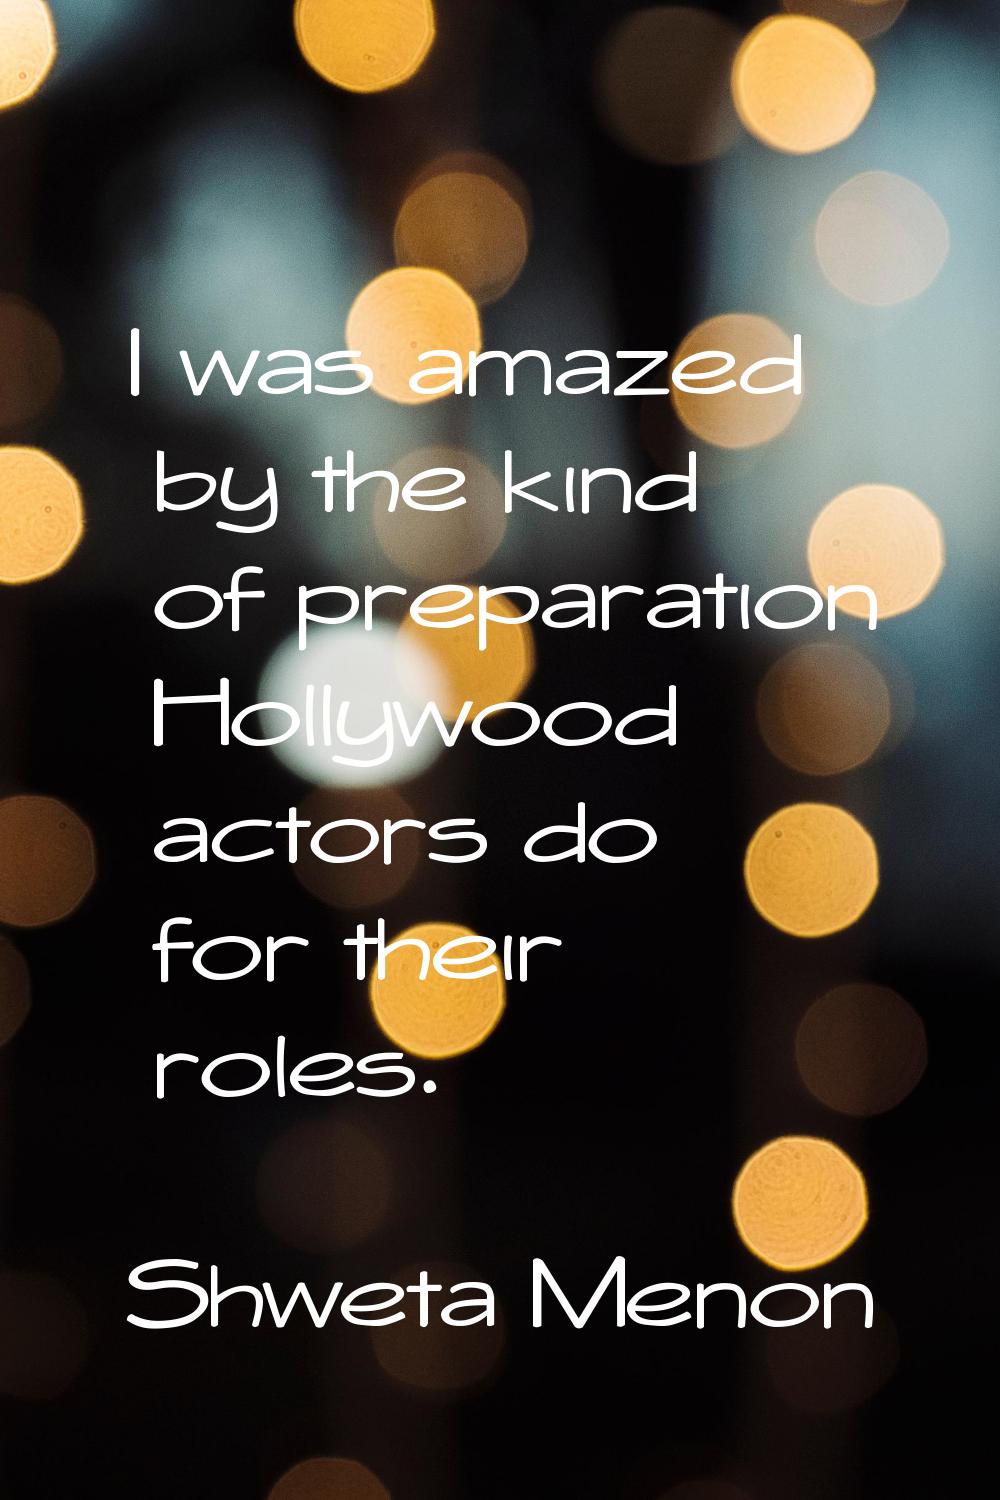 I was amazed by the kind of preparation Hollywood actors do for their roles.